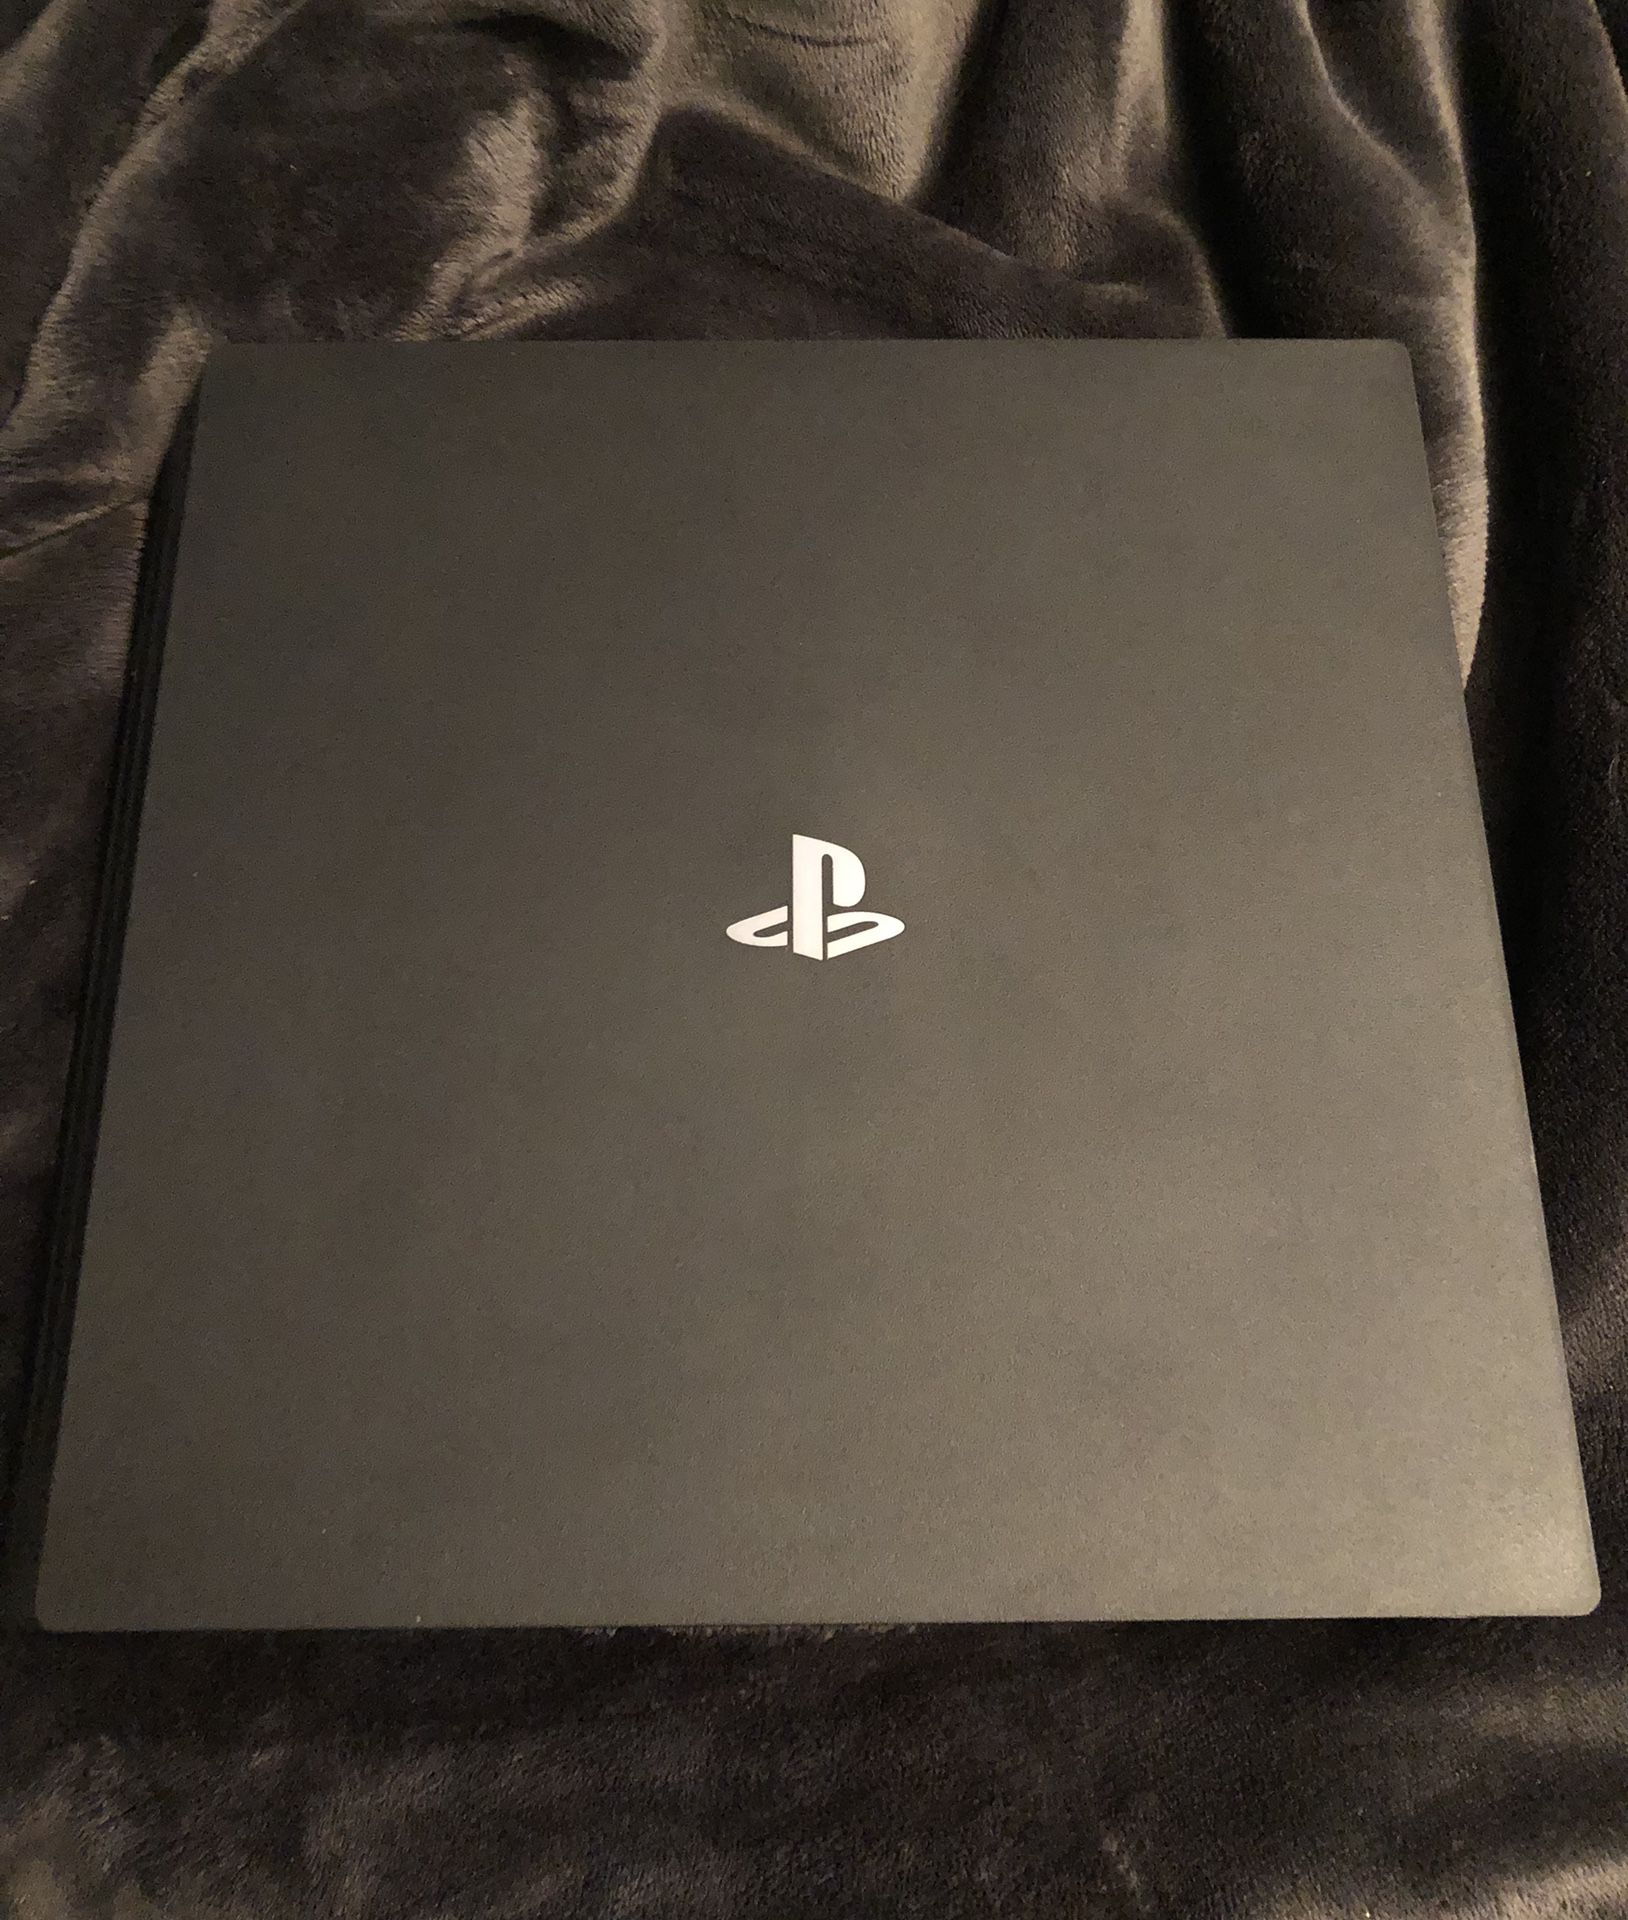 Ps4 Pro with wireless headphones and games